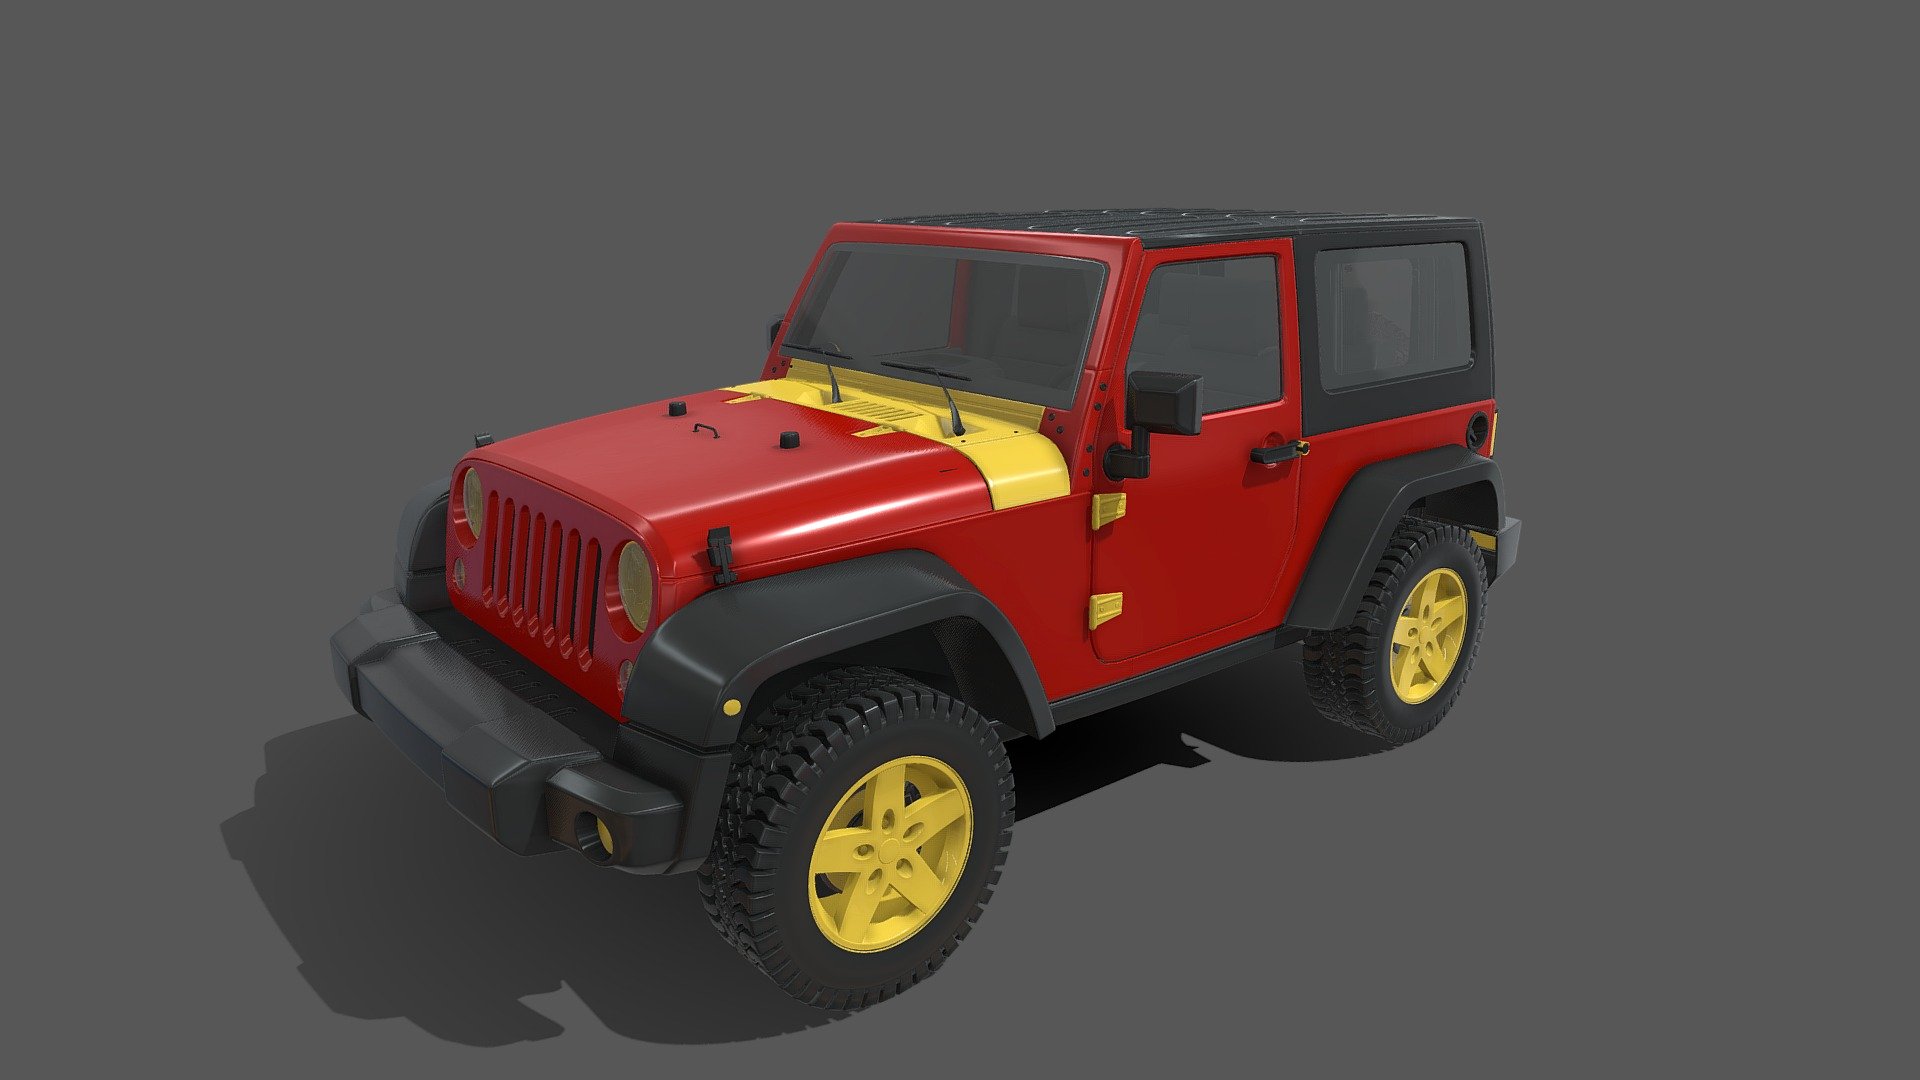 Classic Jeep  Ready For Games And Videos And What You Want To Create With That You can

Includes

Obs , Blender , Fbx ,texture Highly Customizable Ready For Unreal , Unity All Software Supported

Ready For 3d Printing

you Can Support me on Patreon

https://www.patreon.com/UnrealExpert - Classic Jeep - 3D model by SD Designer (@Mohan355634gh) 3d model